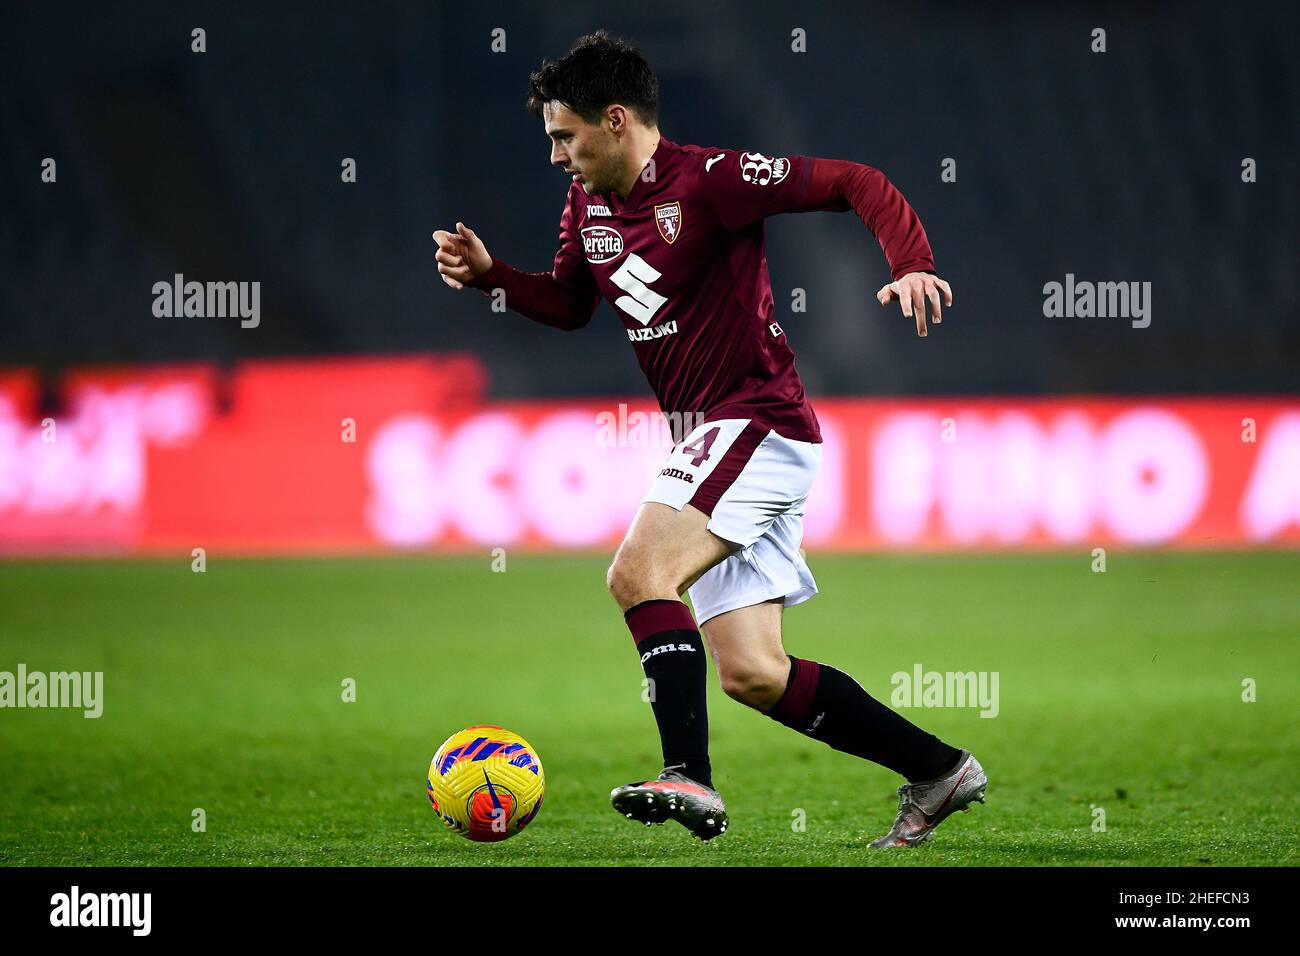 Turin, Italy. 10 January 2022. Josip Brekalo of Torino FC in action during the Serie A football match between Torino FC and ACF Fiorentina. Credit: Nicolò Campo/Alamy Live News Stock Photo